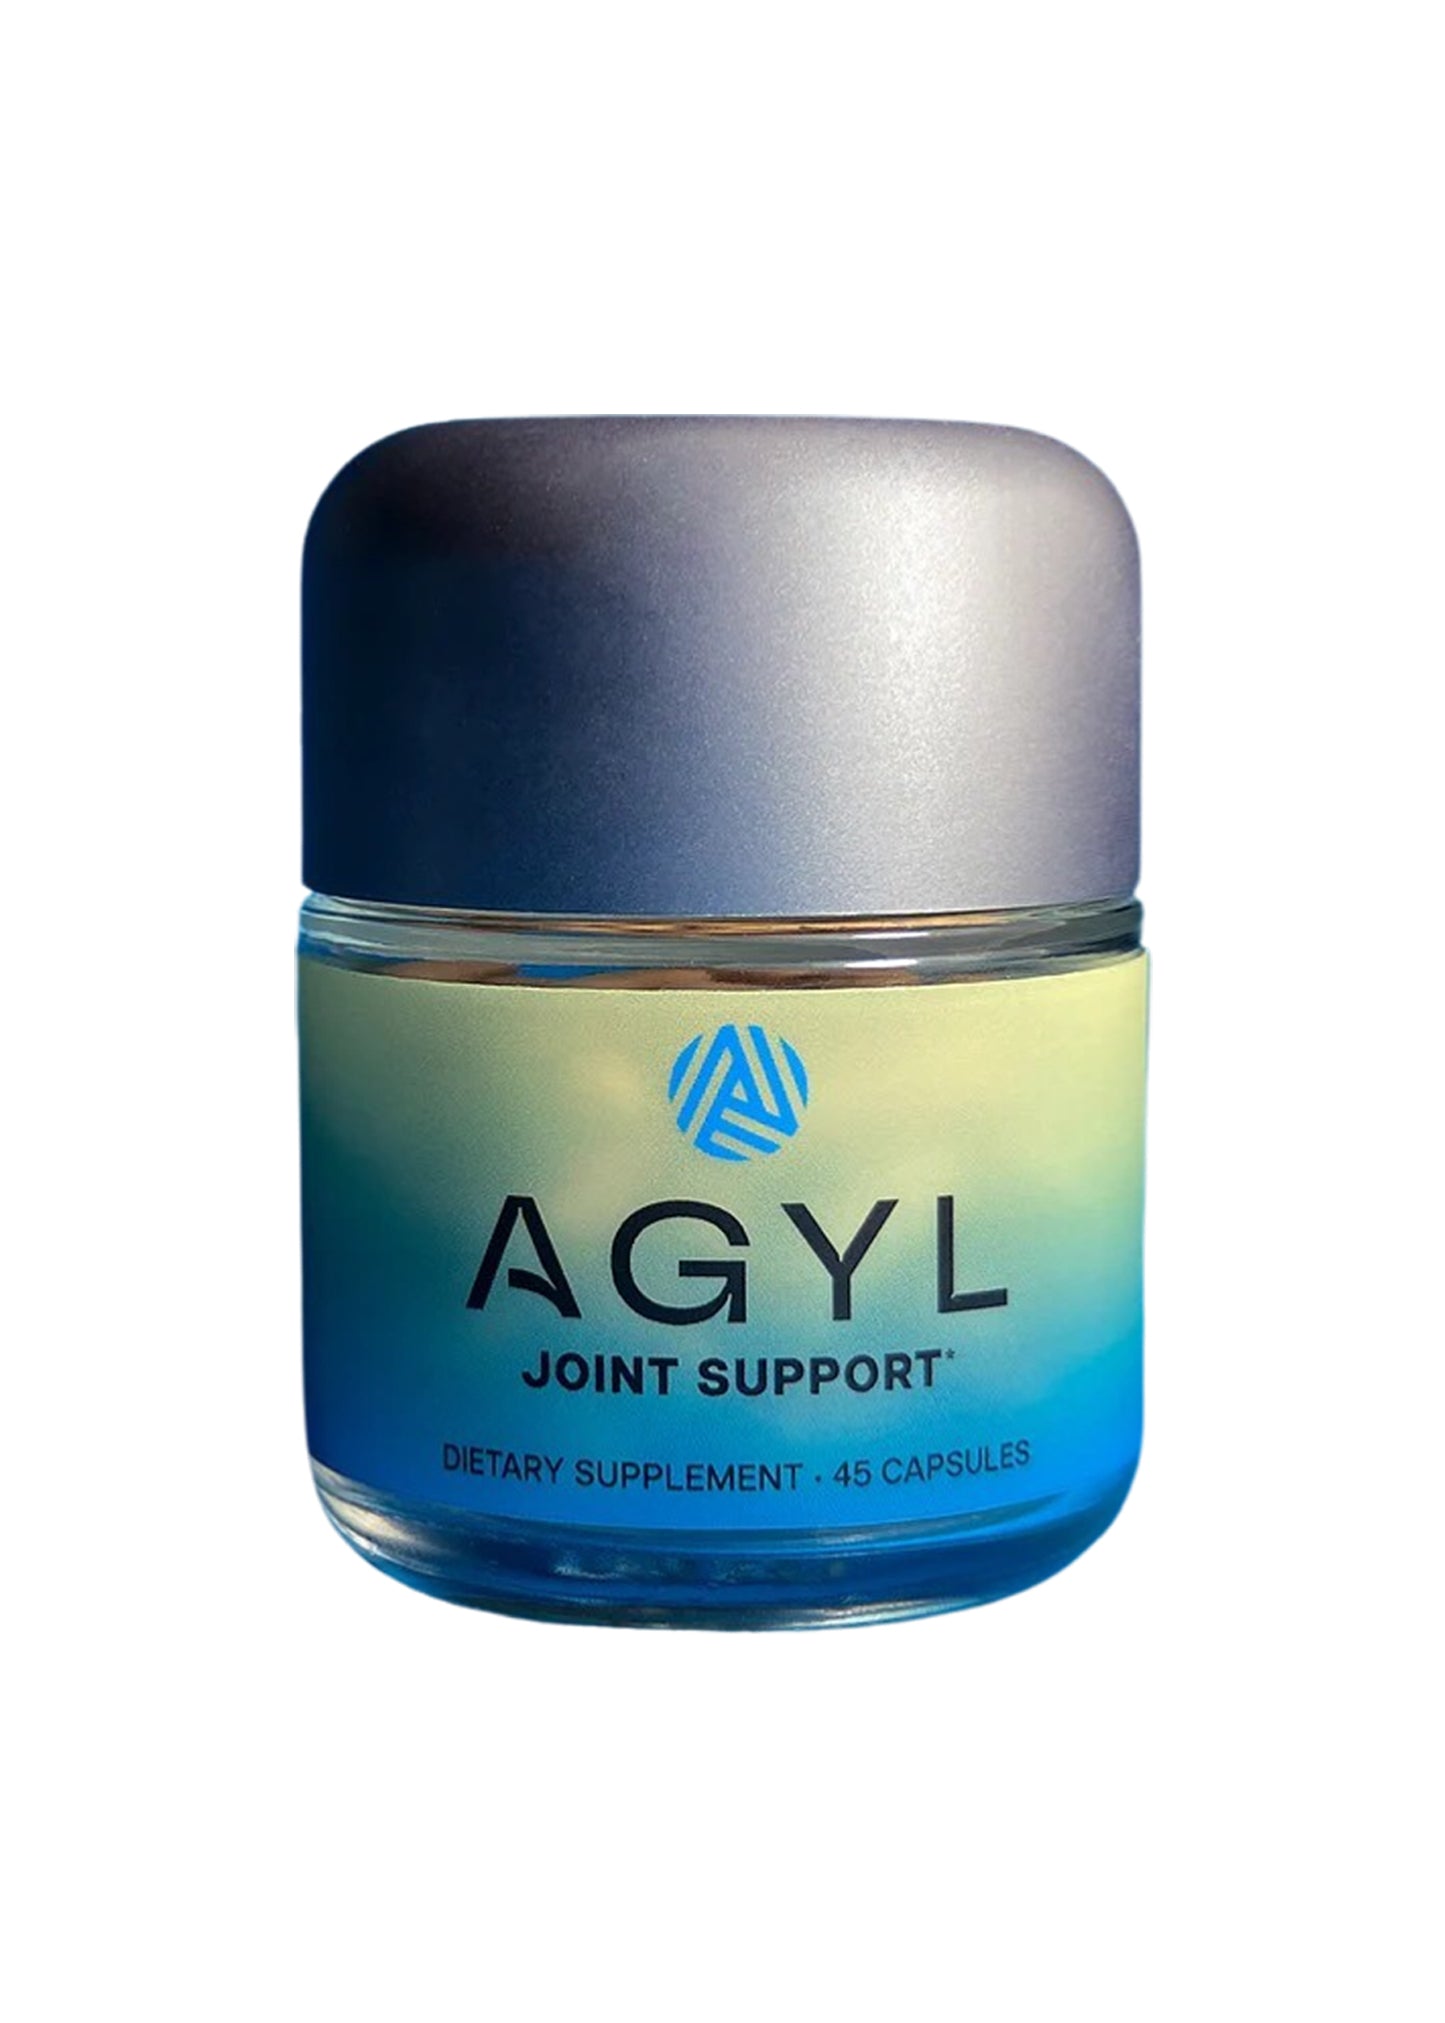 AGYL Joint Support*